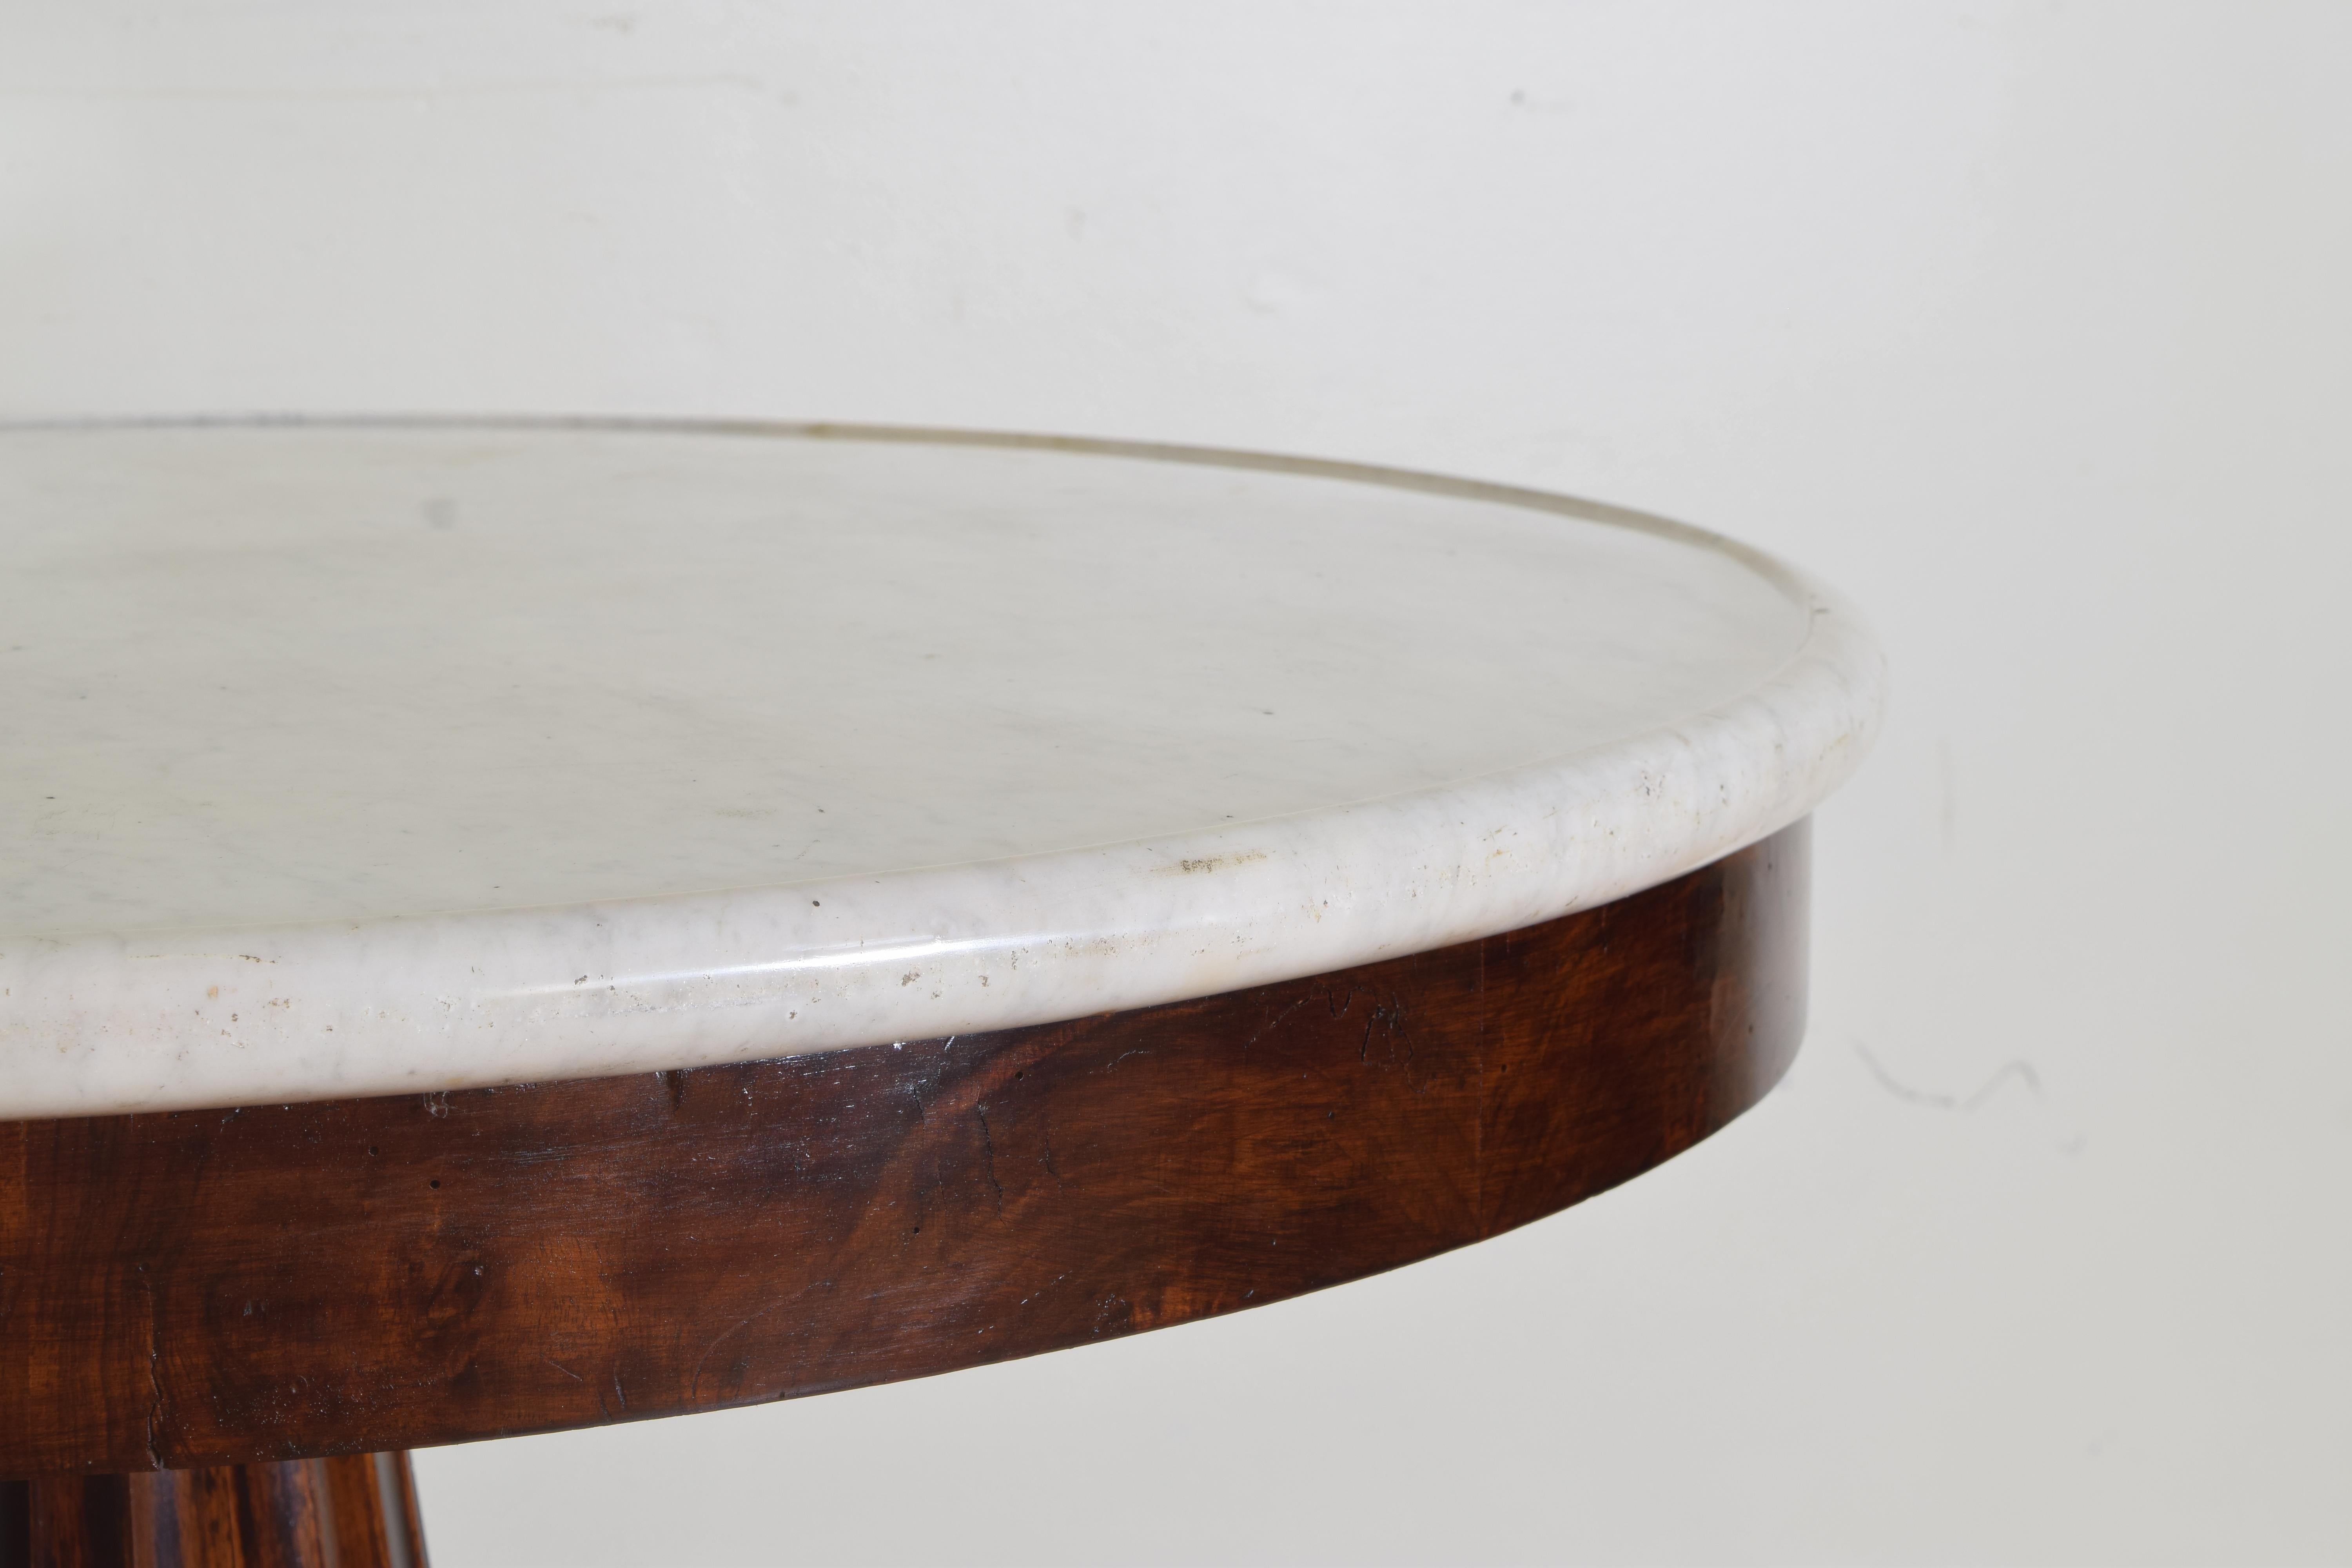 Early 19th Century Northern Italian Neoclassic Shaped Walnut Center Table with Marble Top, ca. 1825